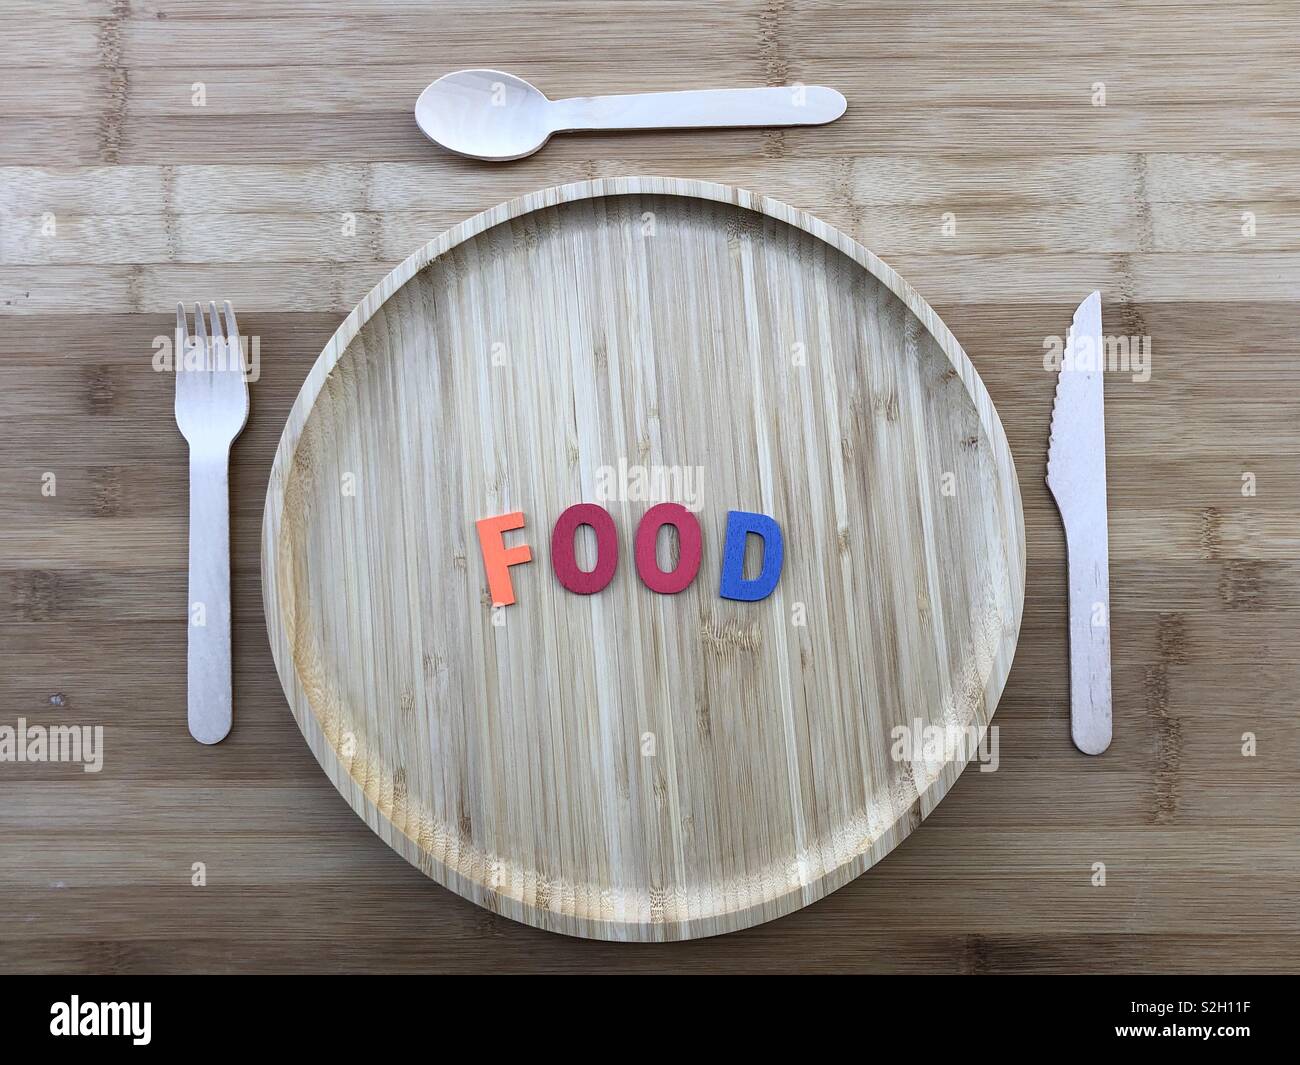 wooden dish with wooden cutlery over a wooden table abd colored wooden letters for the word Food Stock Photo